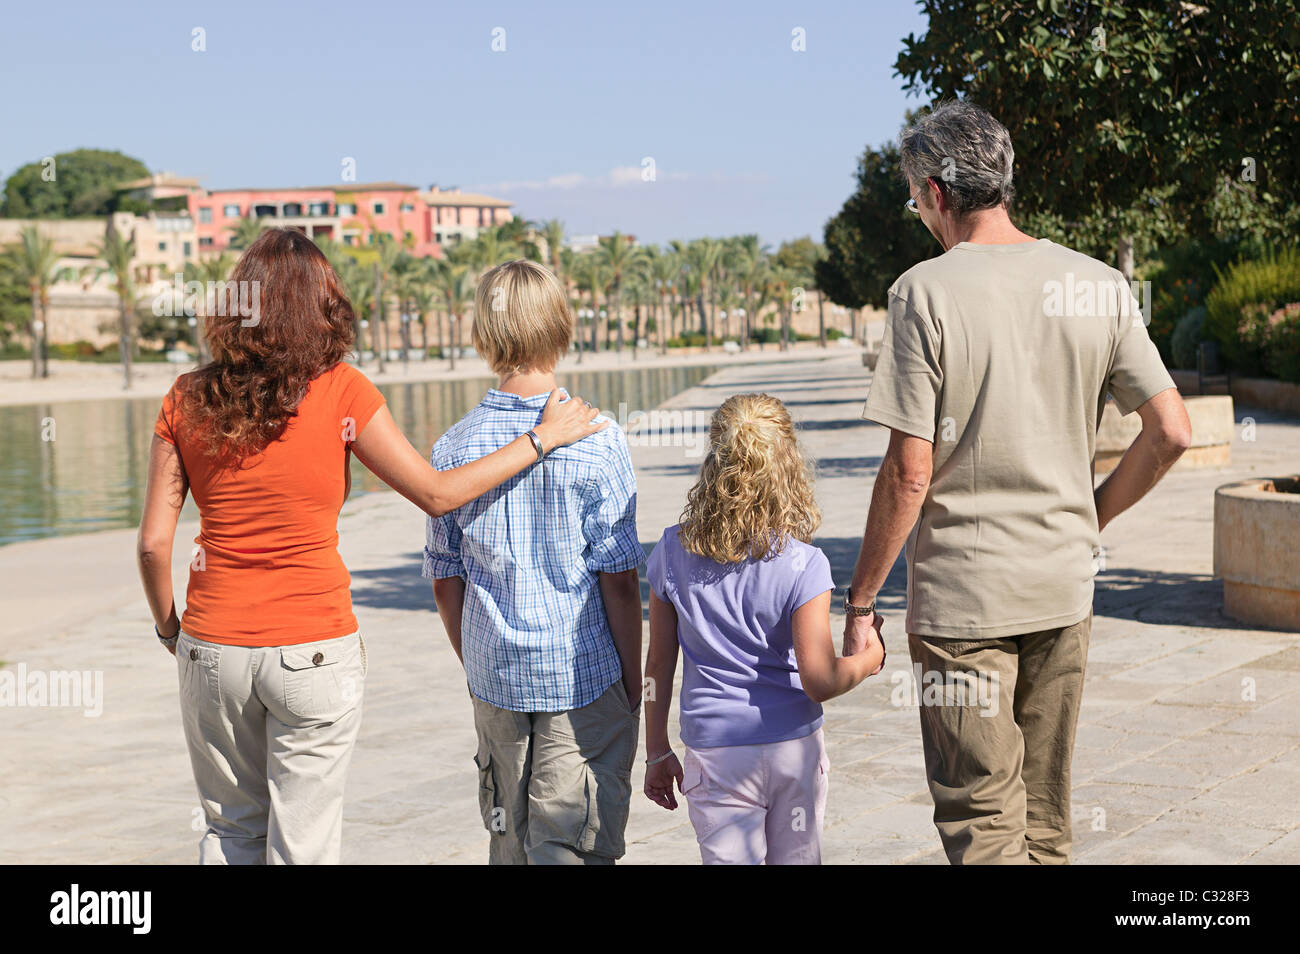 Family walking together Stock Photo